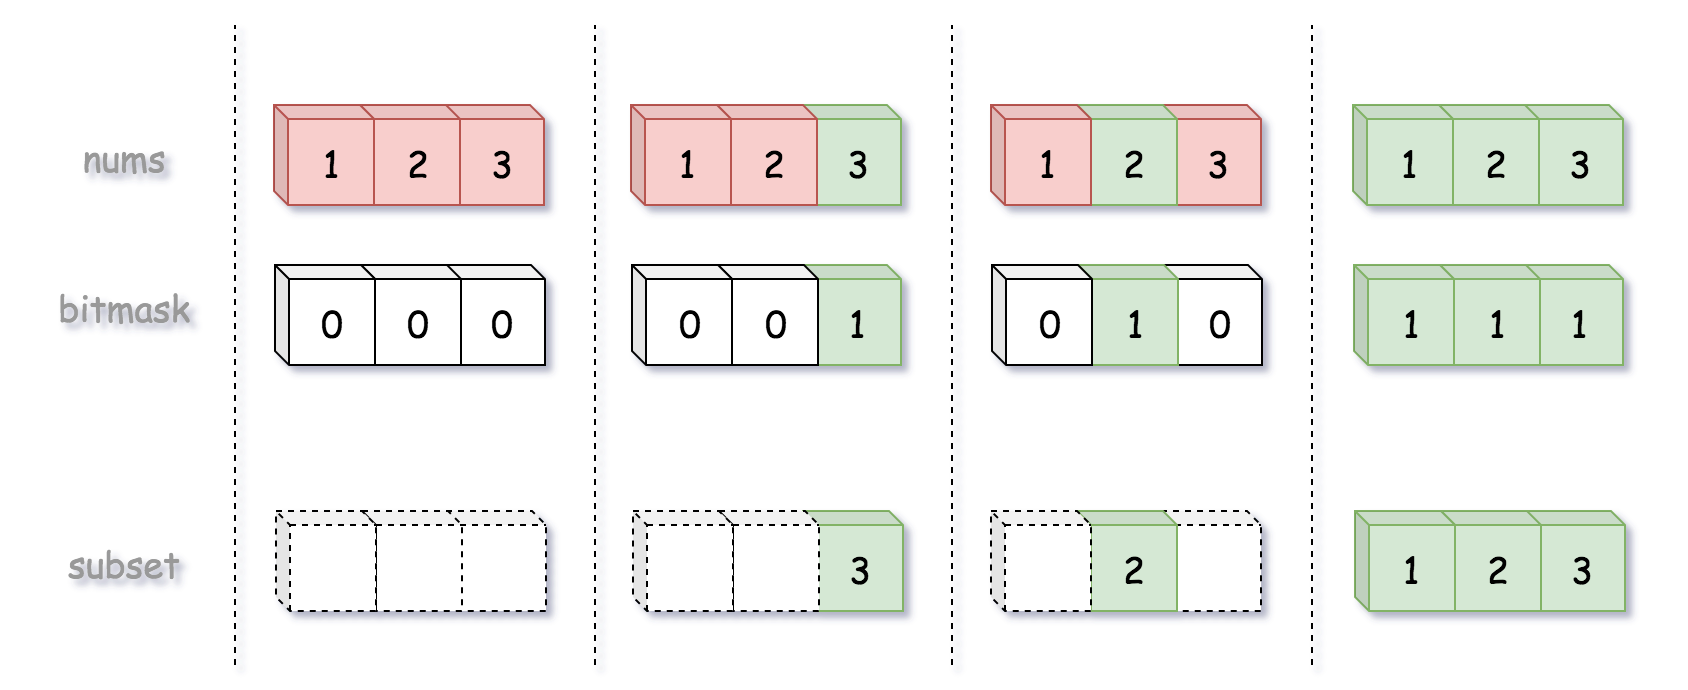 Lexicographic (Binary Sorted) Subsets